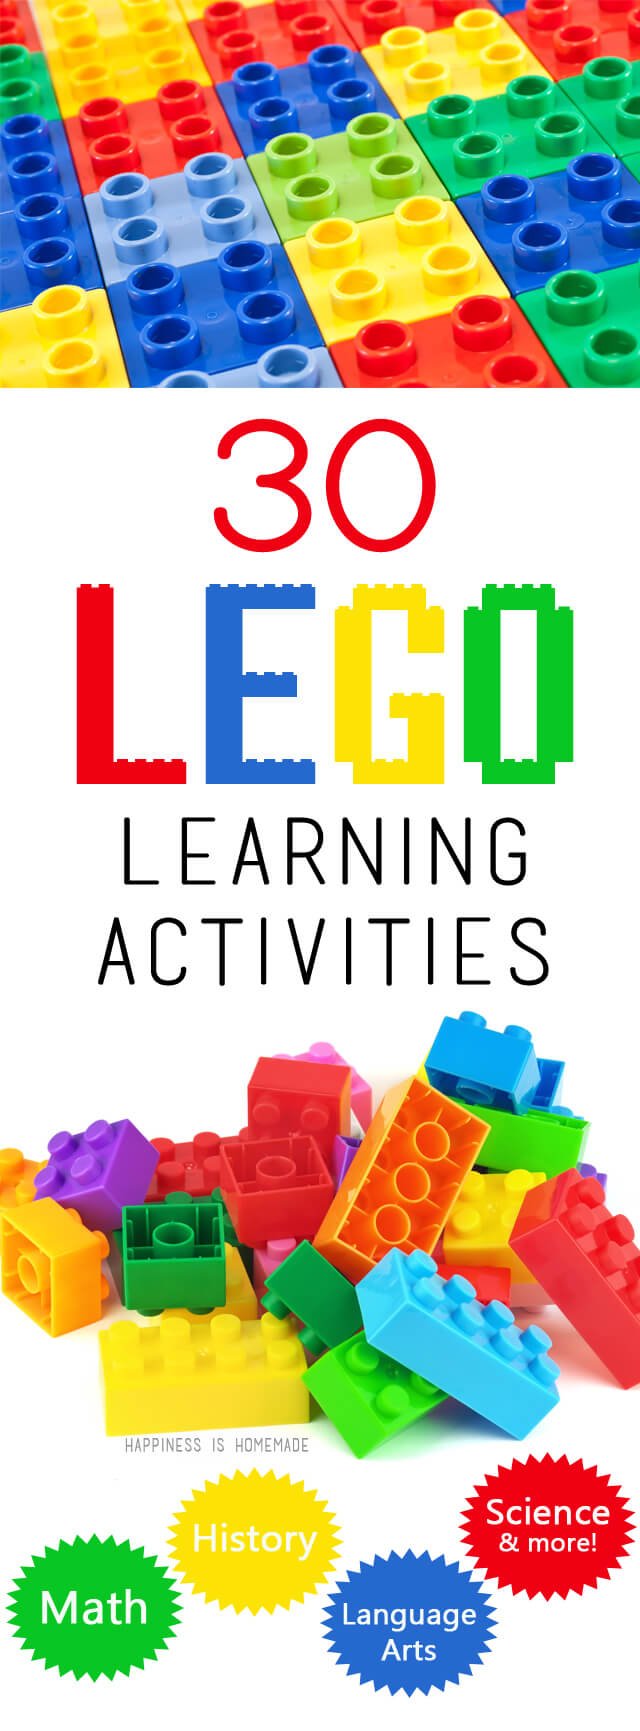 30 LEGO Learning Activities